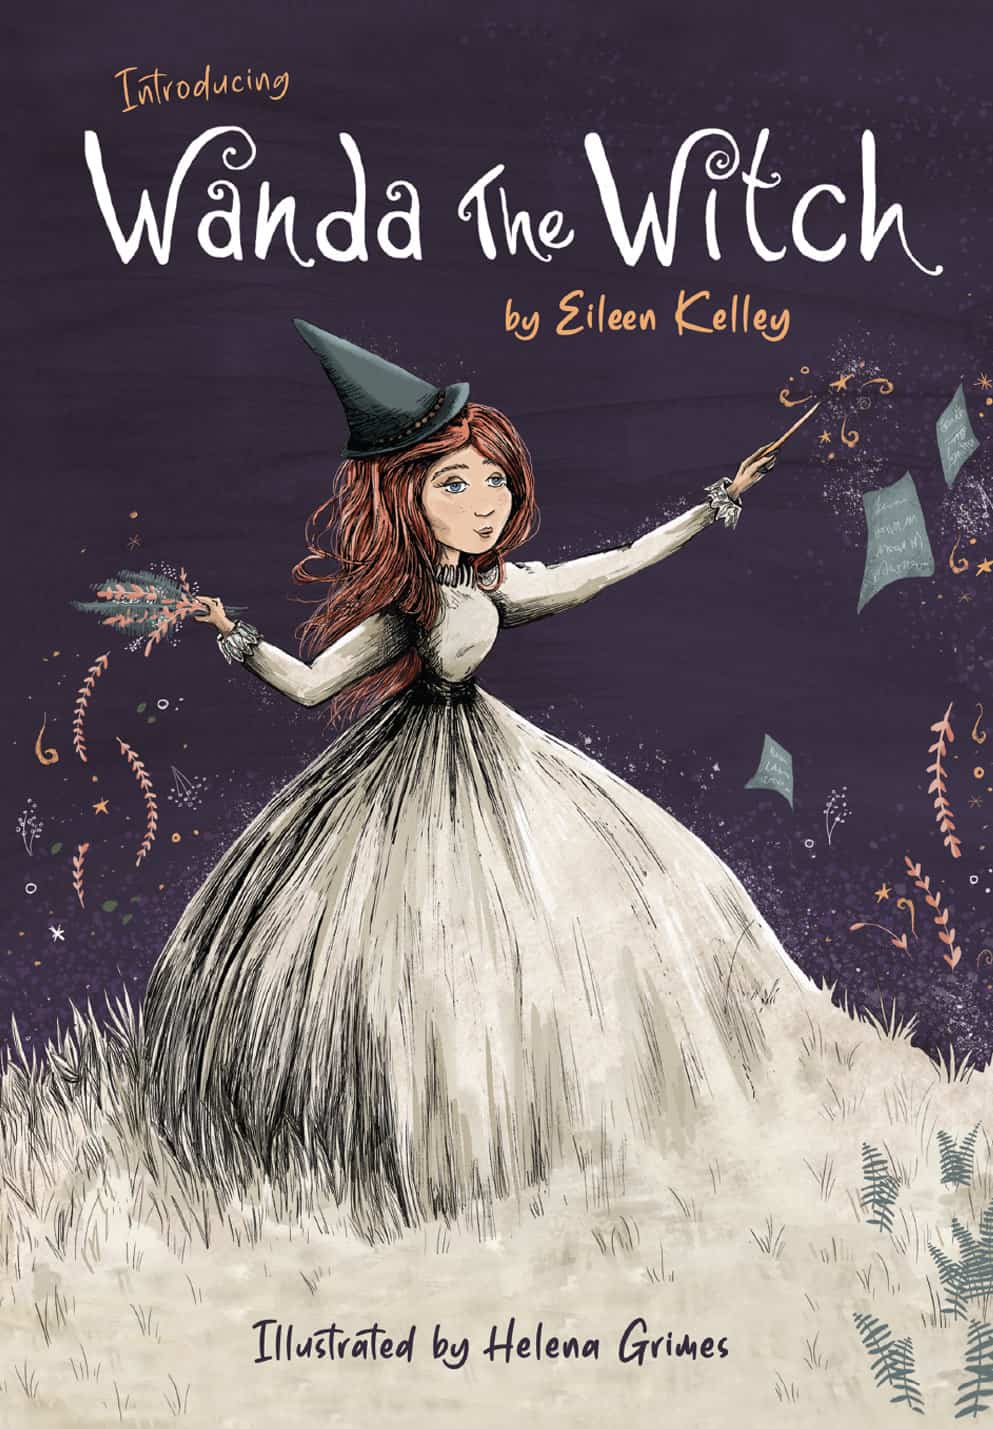 Wanda front cover 003